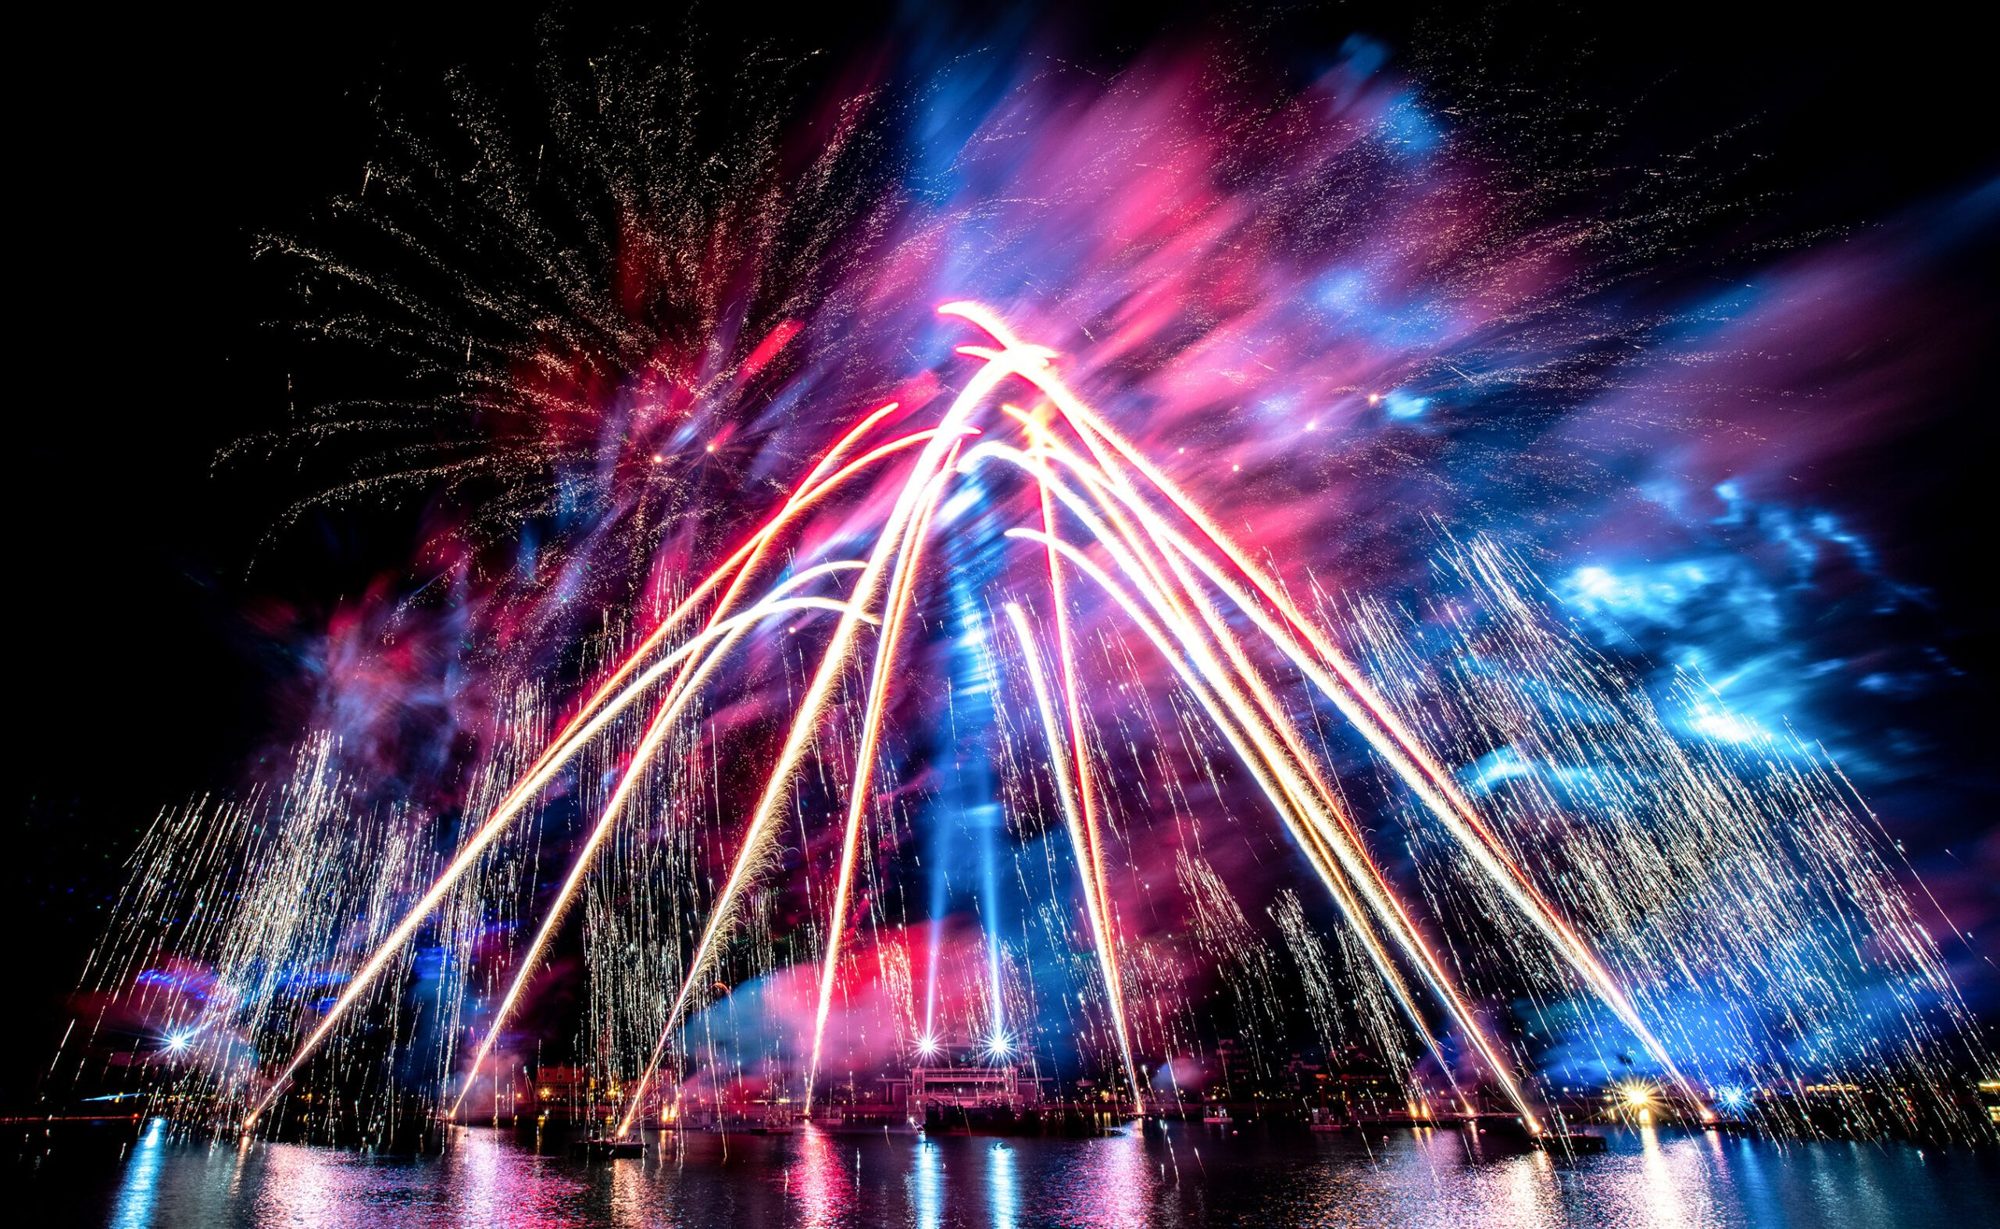 Epcot's fireworks are returning soon.